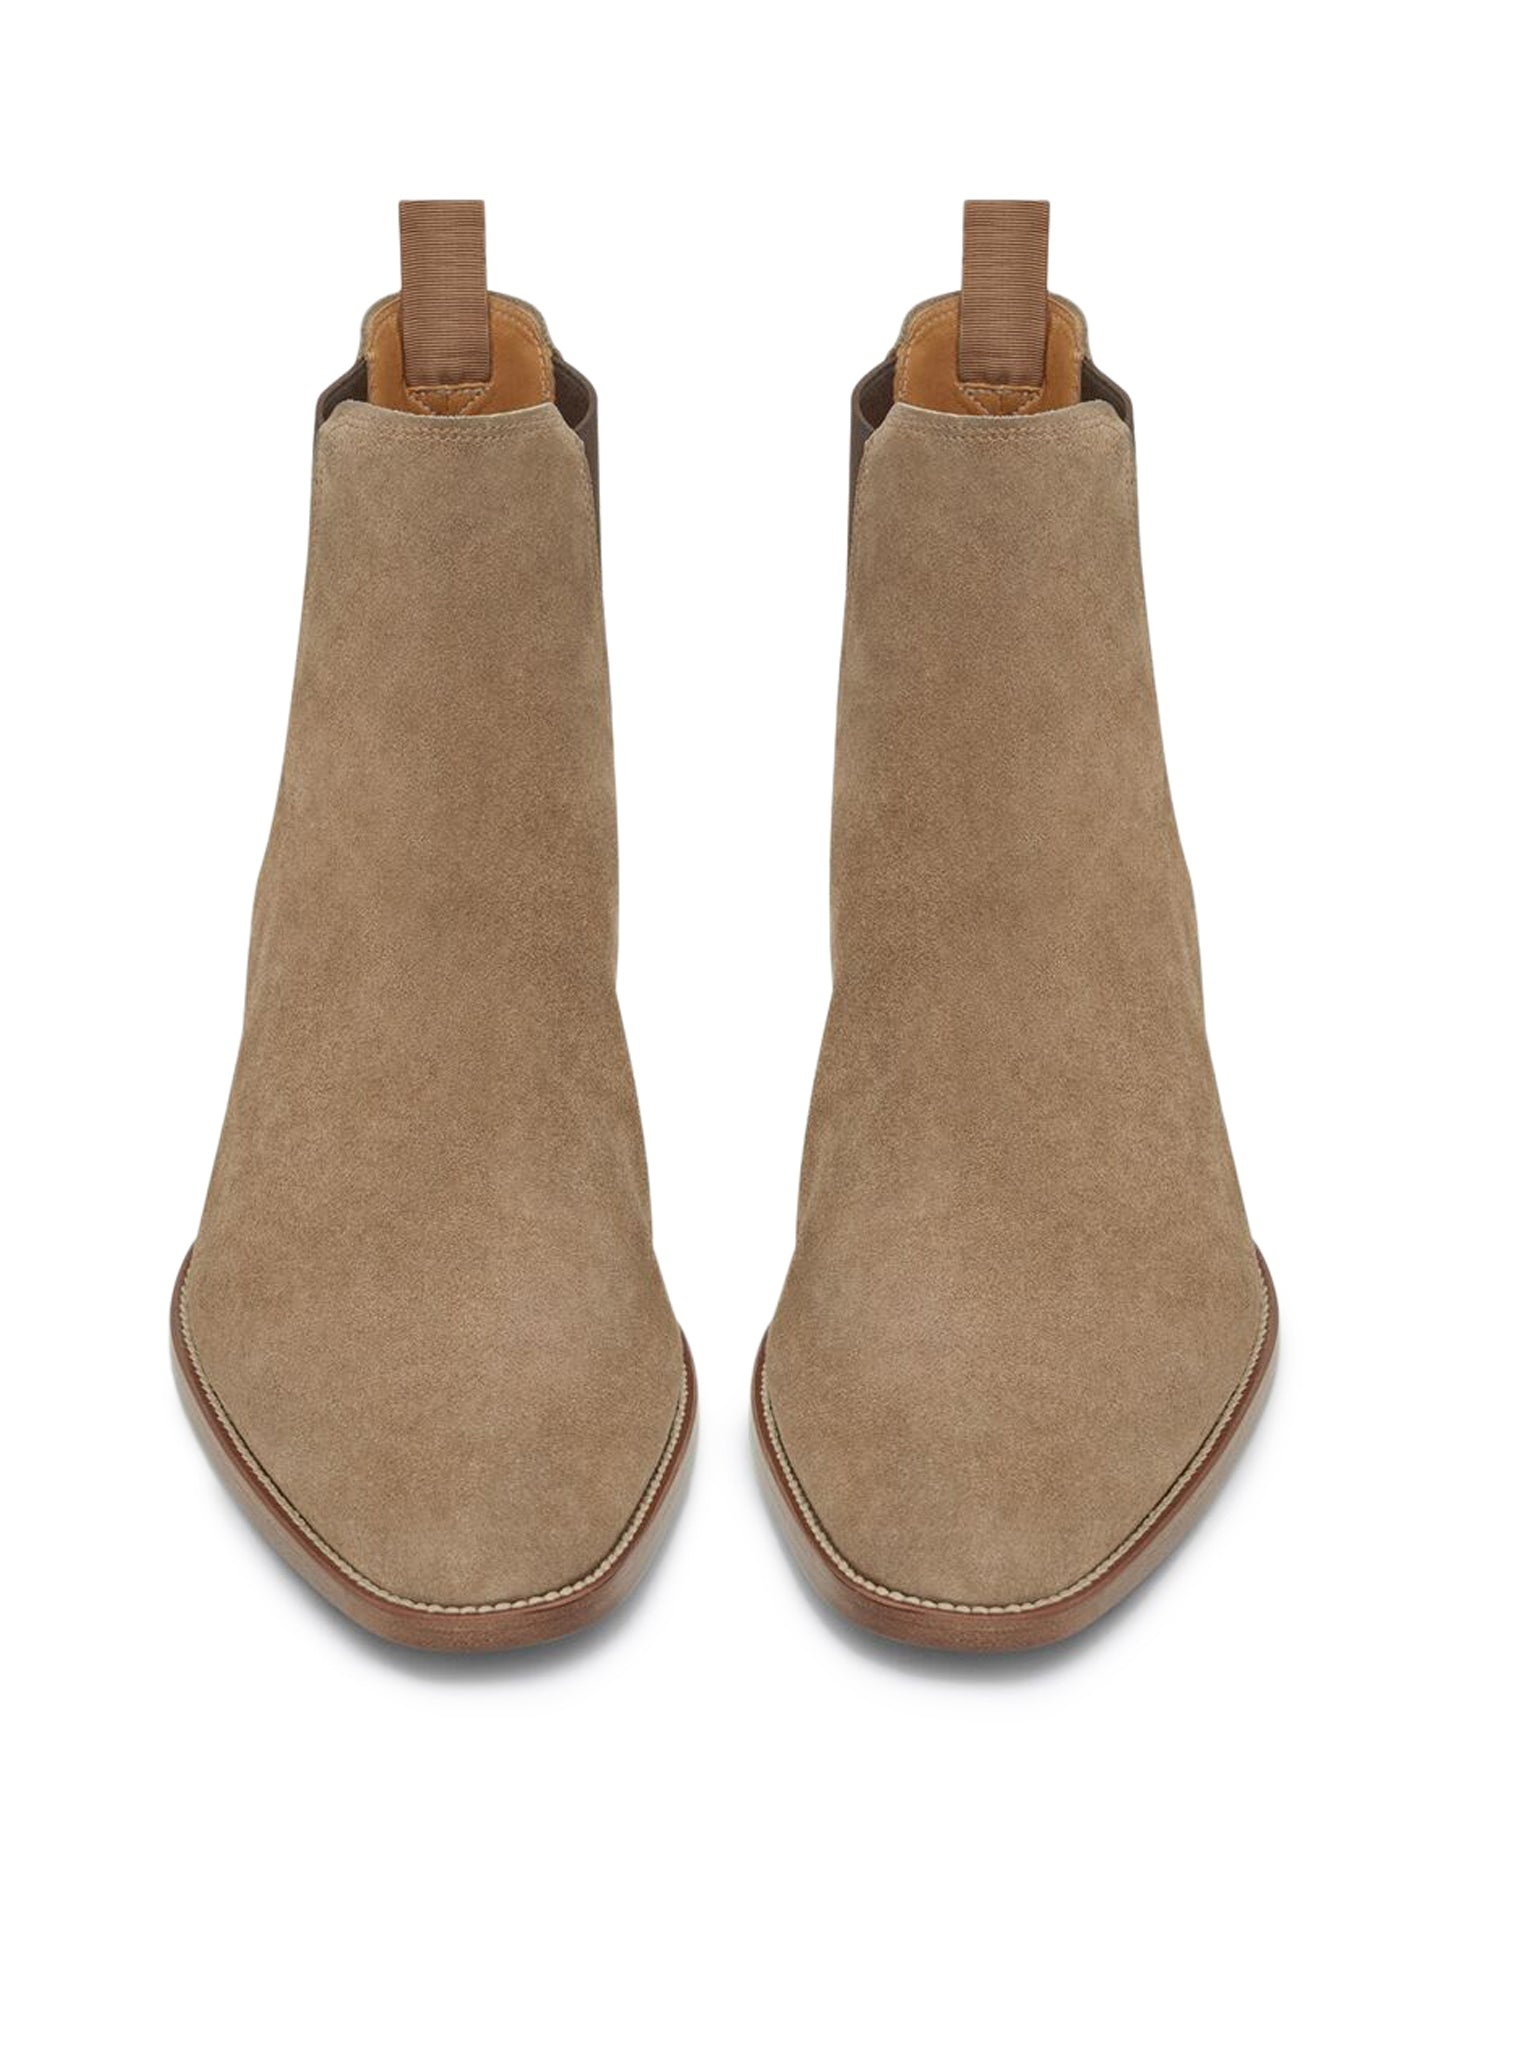 TOBACCO-COLORED WYATT 30 CHELSEA BOOTS IN SUEDE - 3